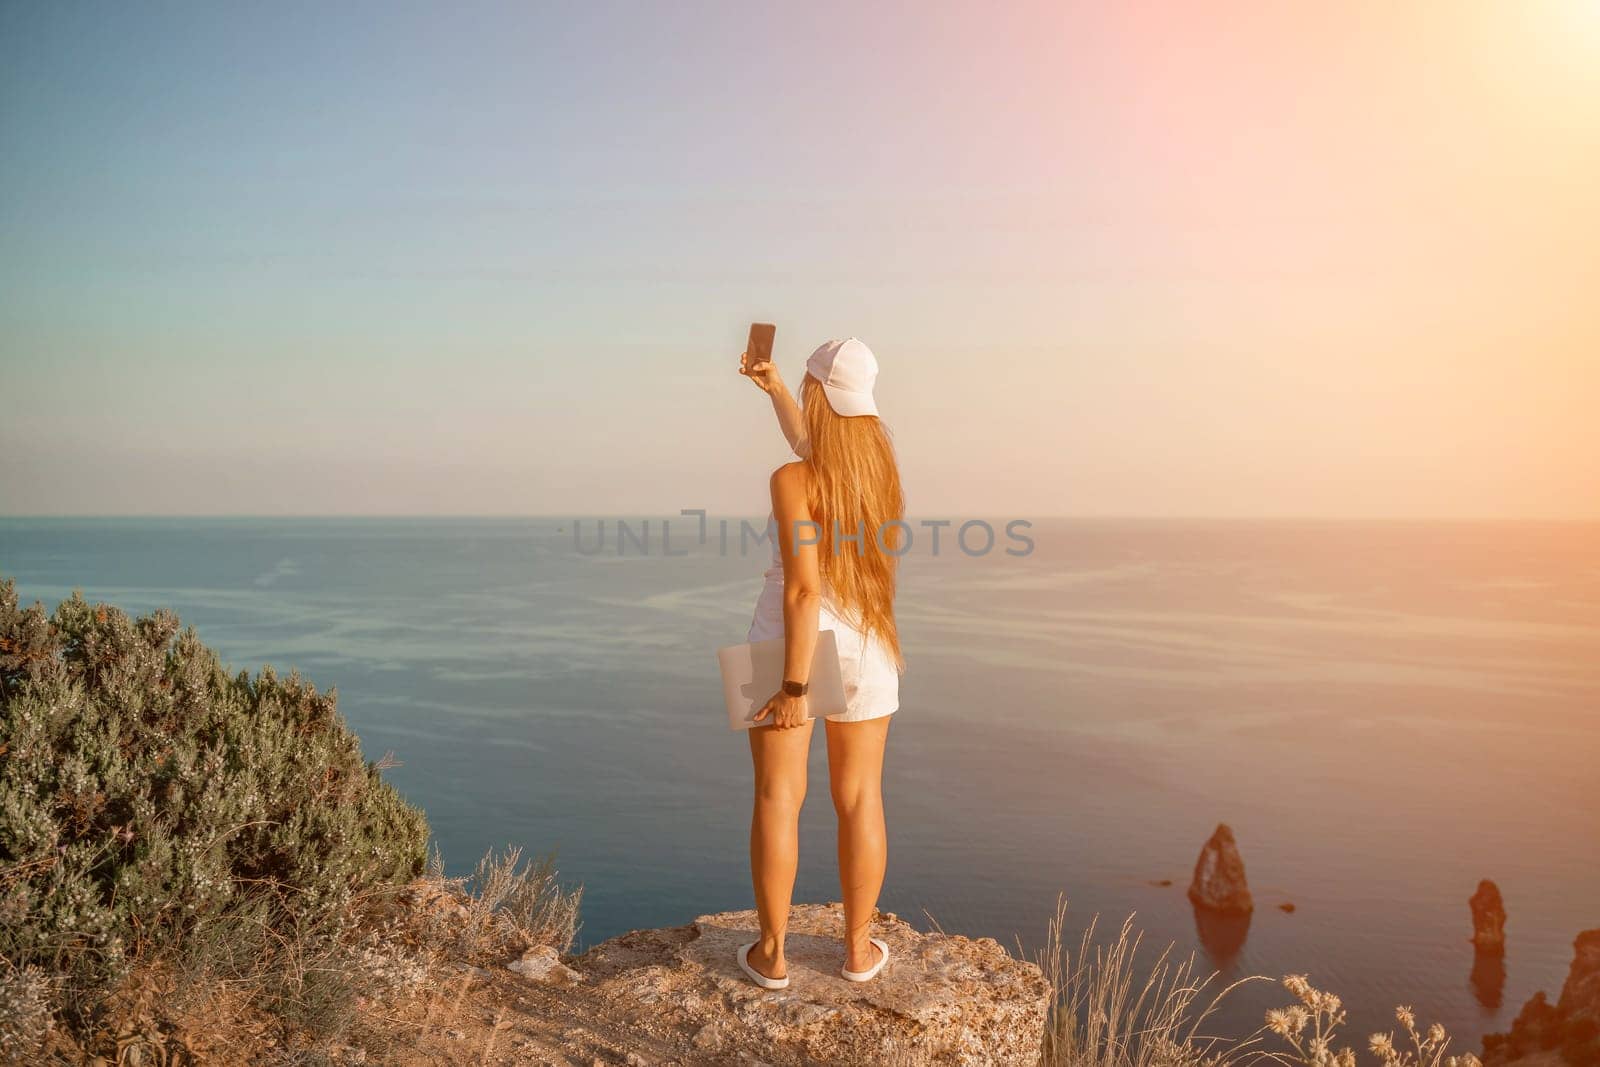 Selfie woman sea. The picture depicts a woman in a cap and tank top, taking a selfie shot with her mobile phone, showcasing her happy and carefree vacation mood against the beautiful sea background by Matiunina